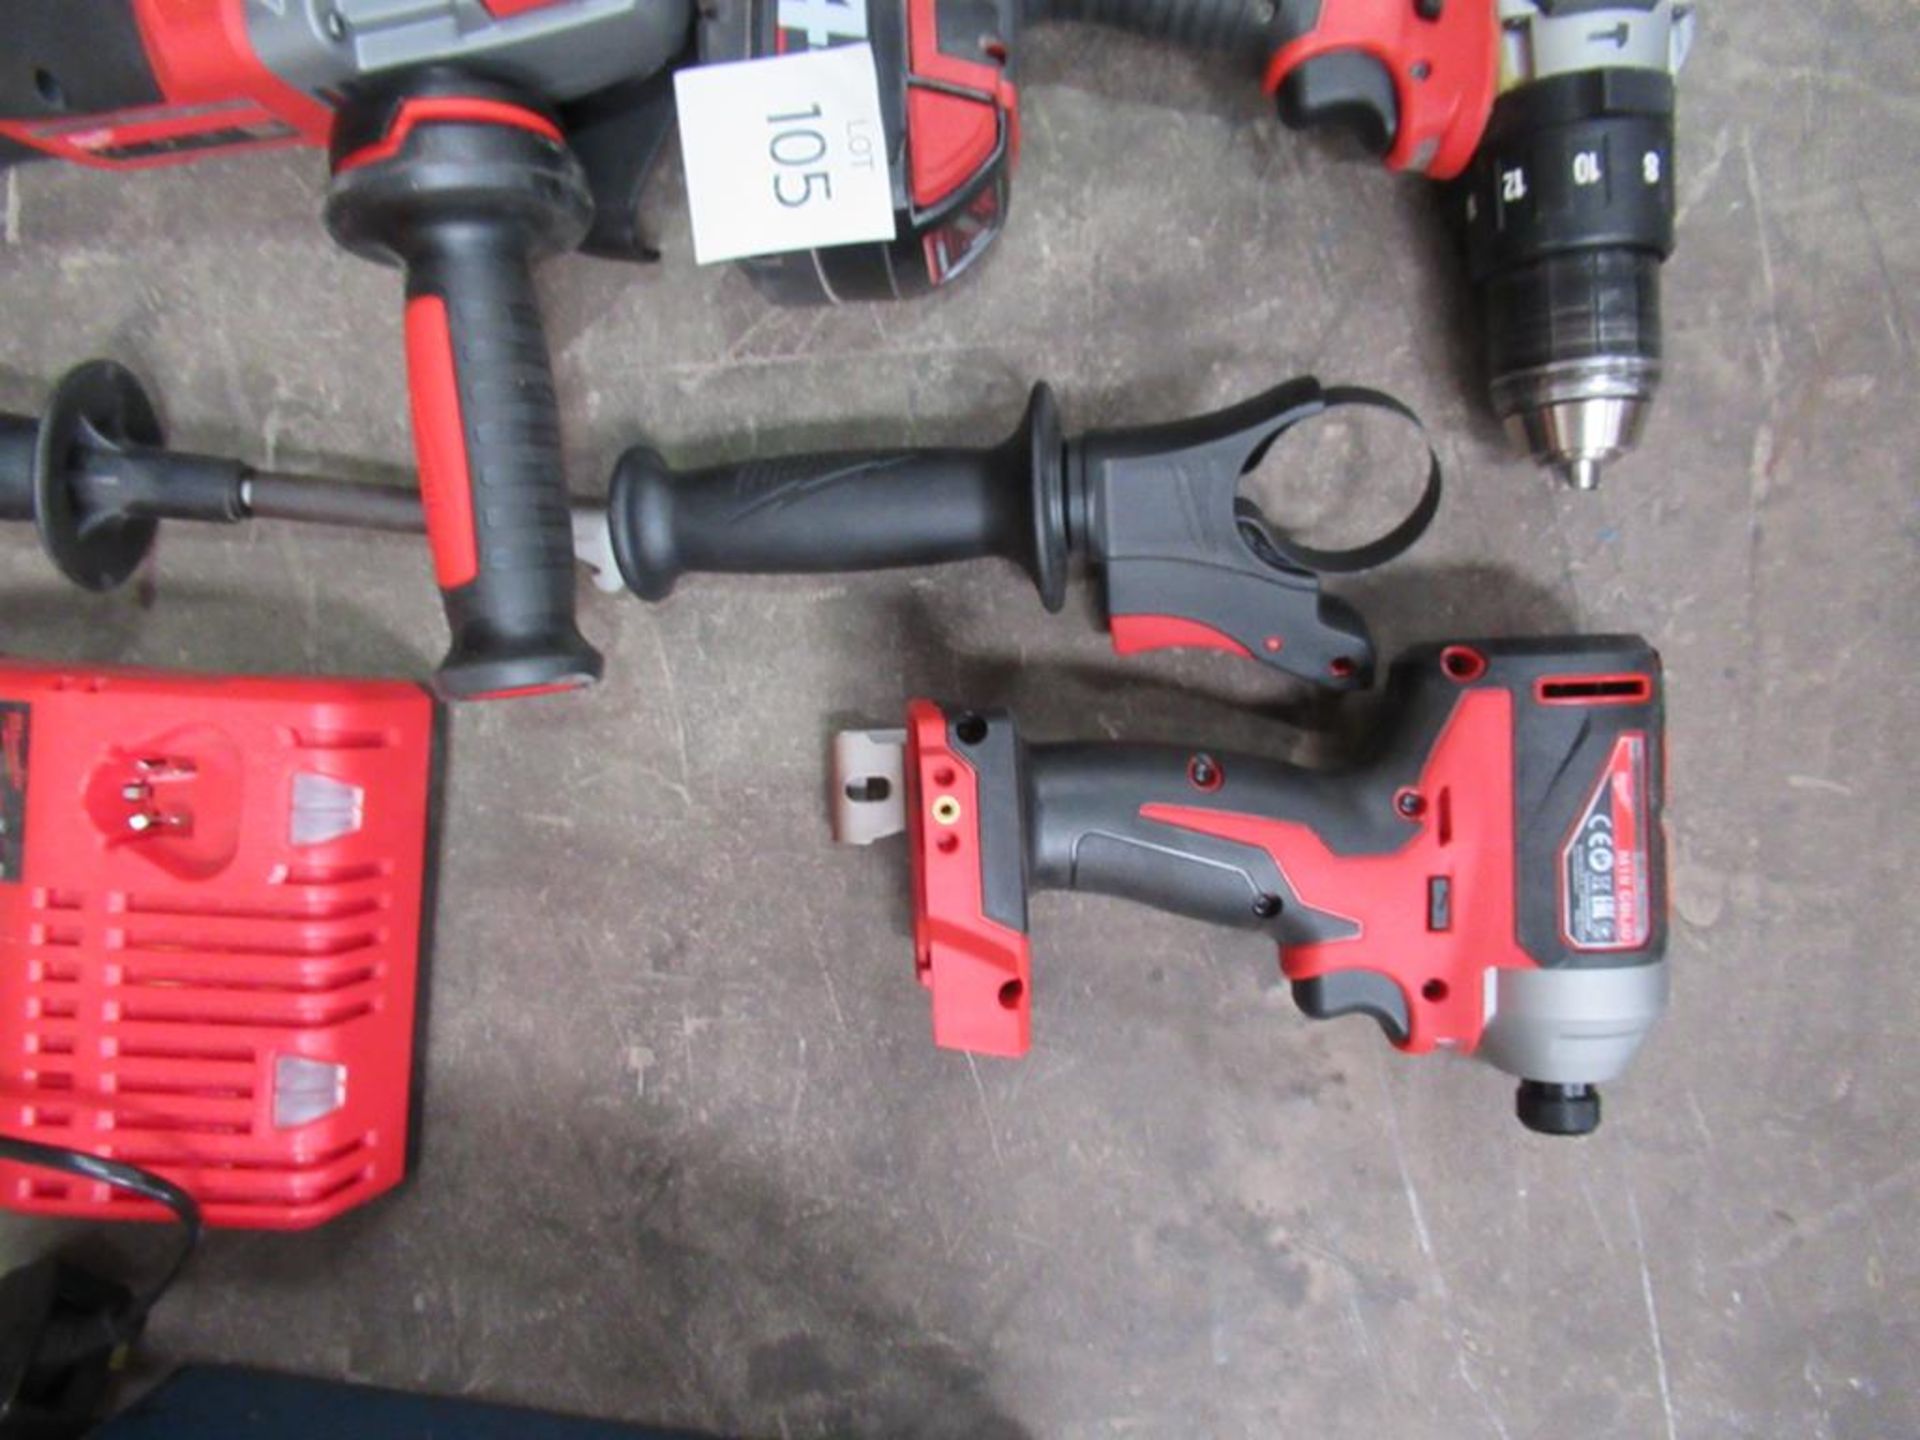 Milwake Cordless Power Tools to include 2 x drill and angle grinder, 1 x battery and charger - Image 4 of 5